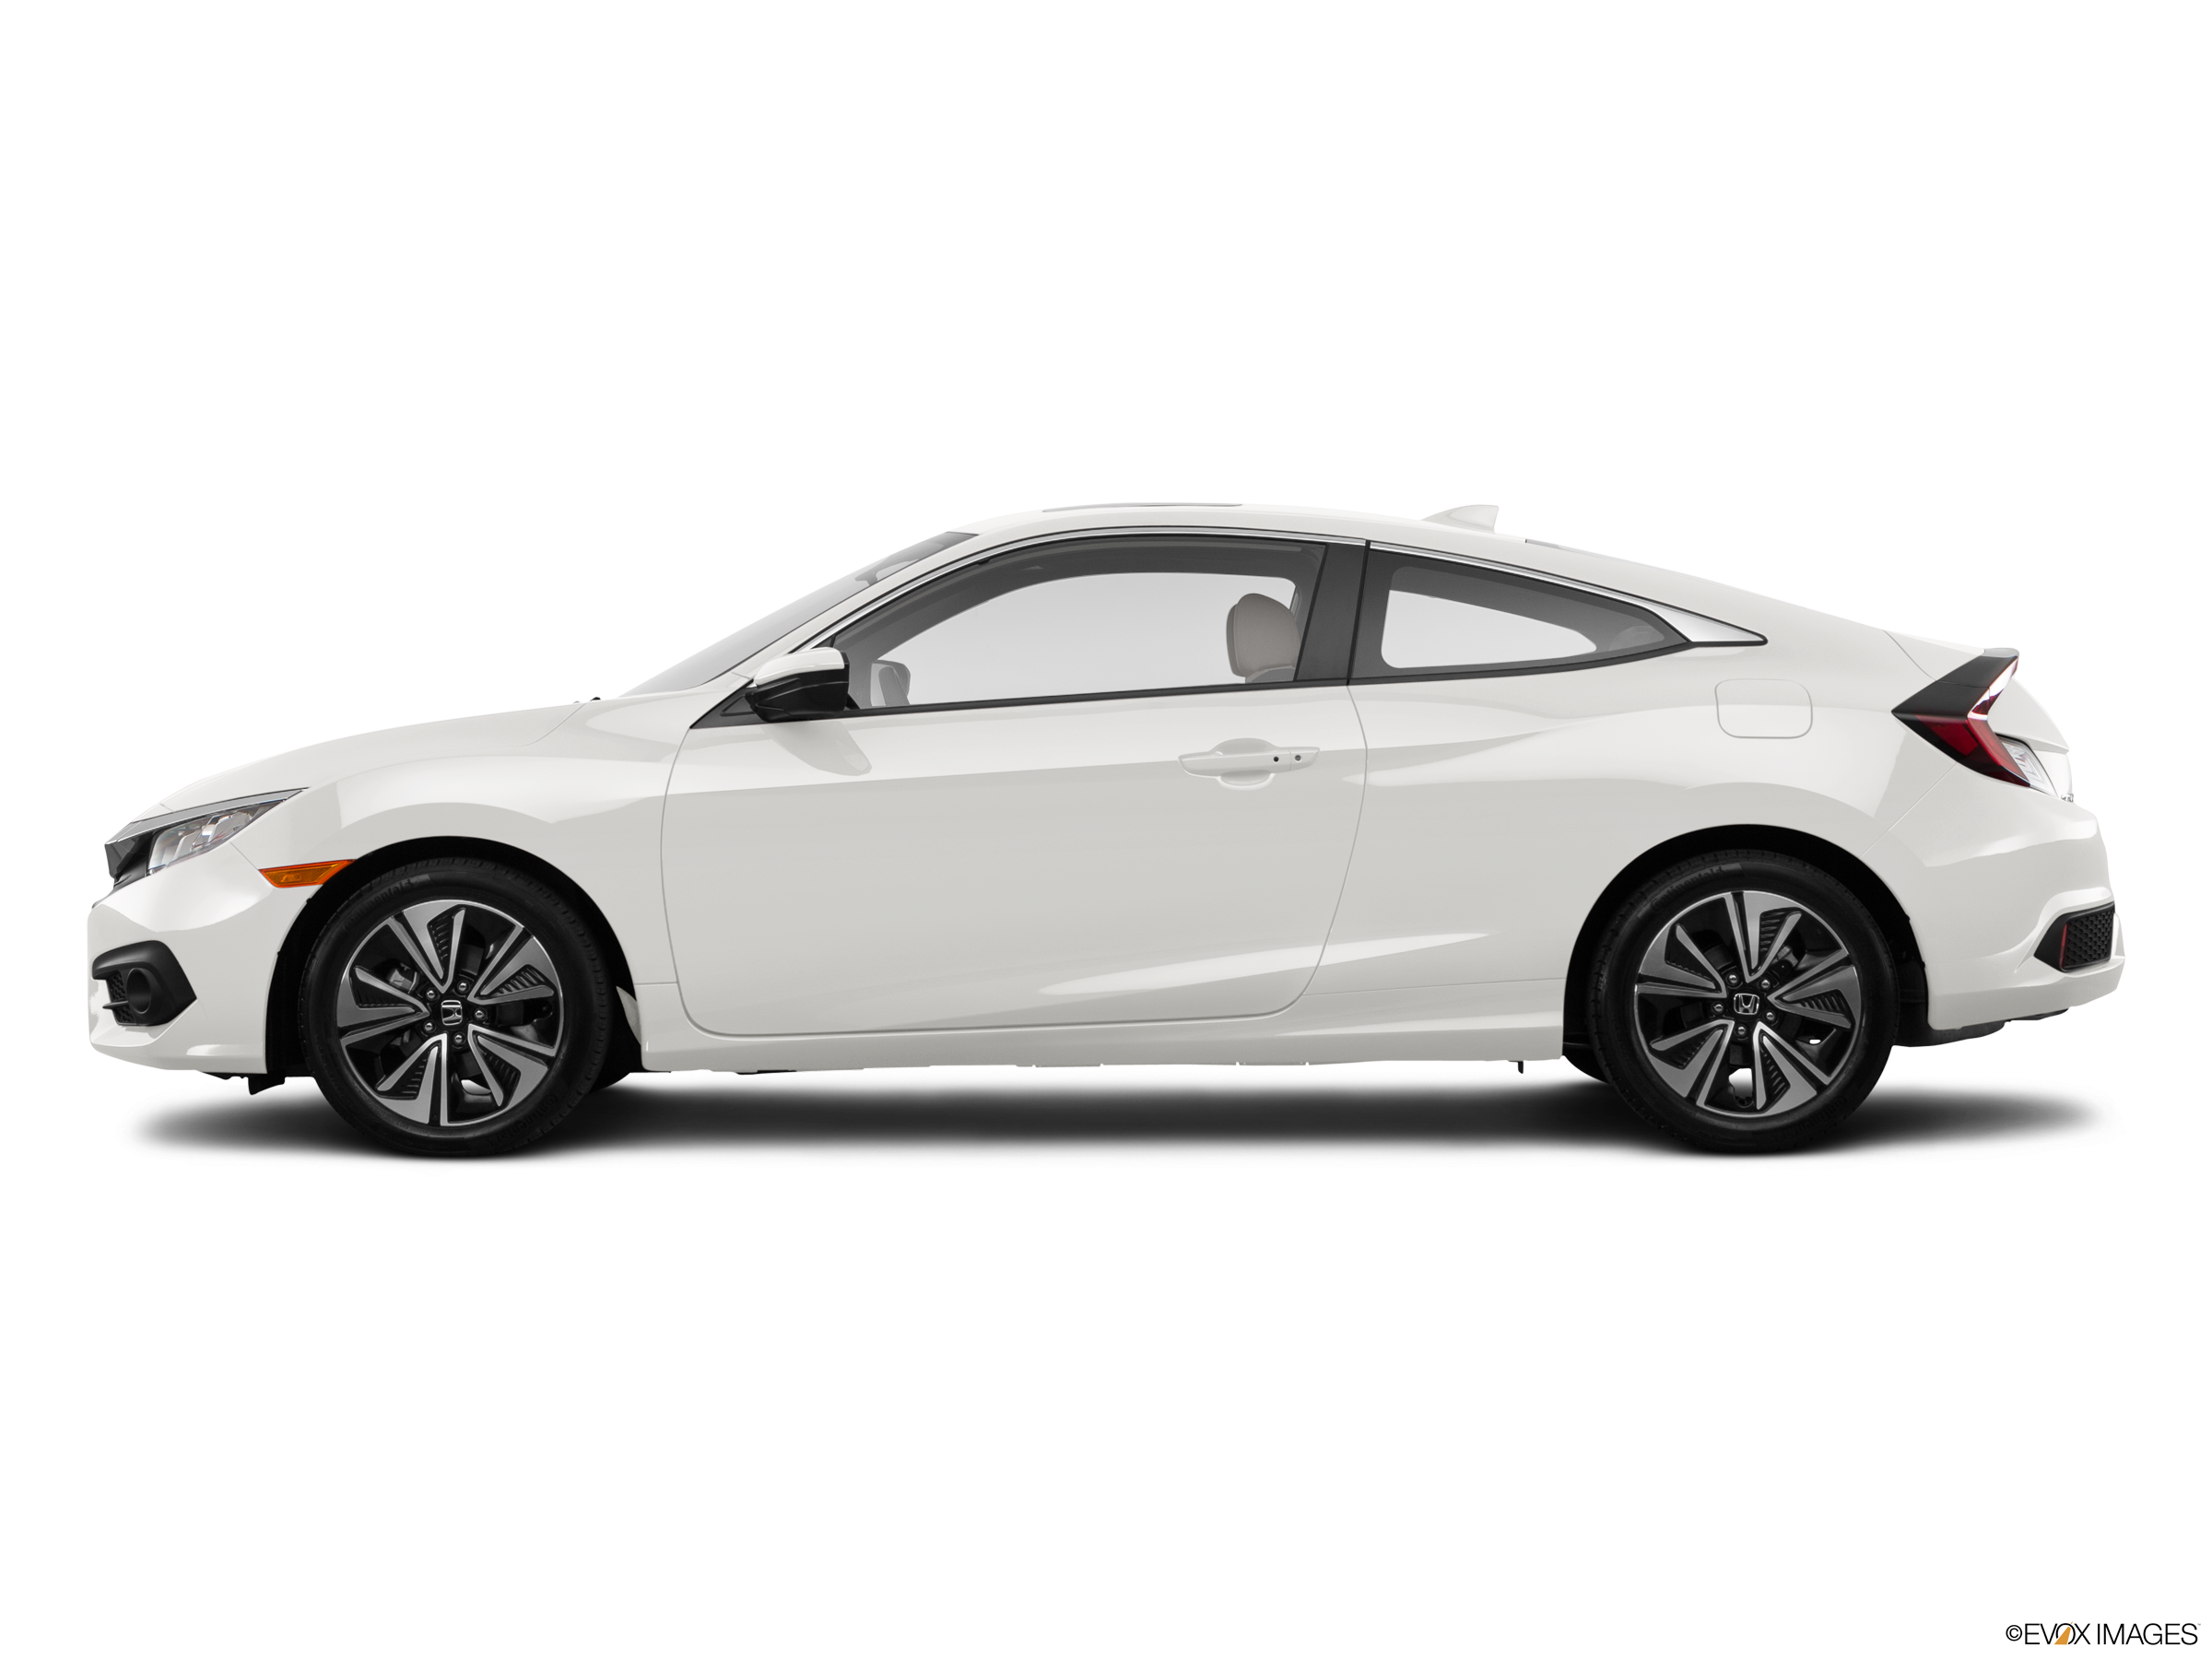 2016 Honda Civic Prices, Reviews, and Photos - MotorTrend